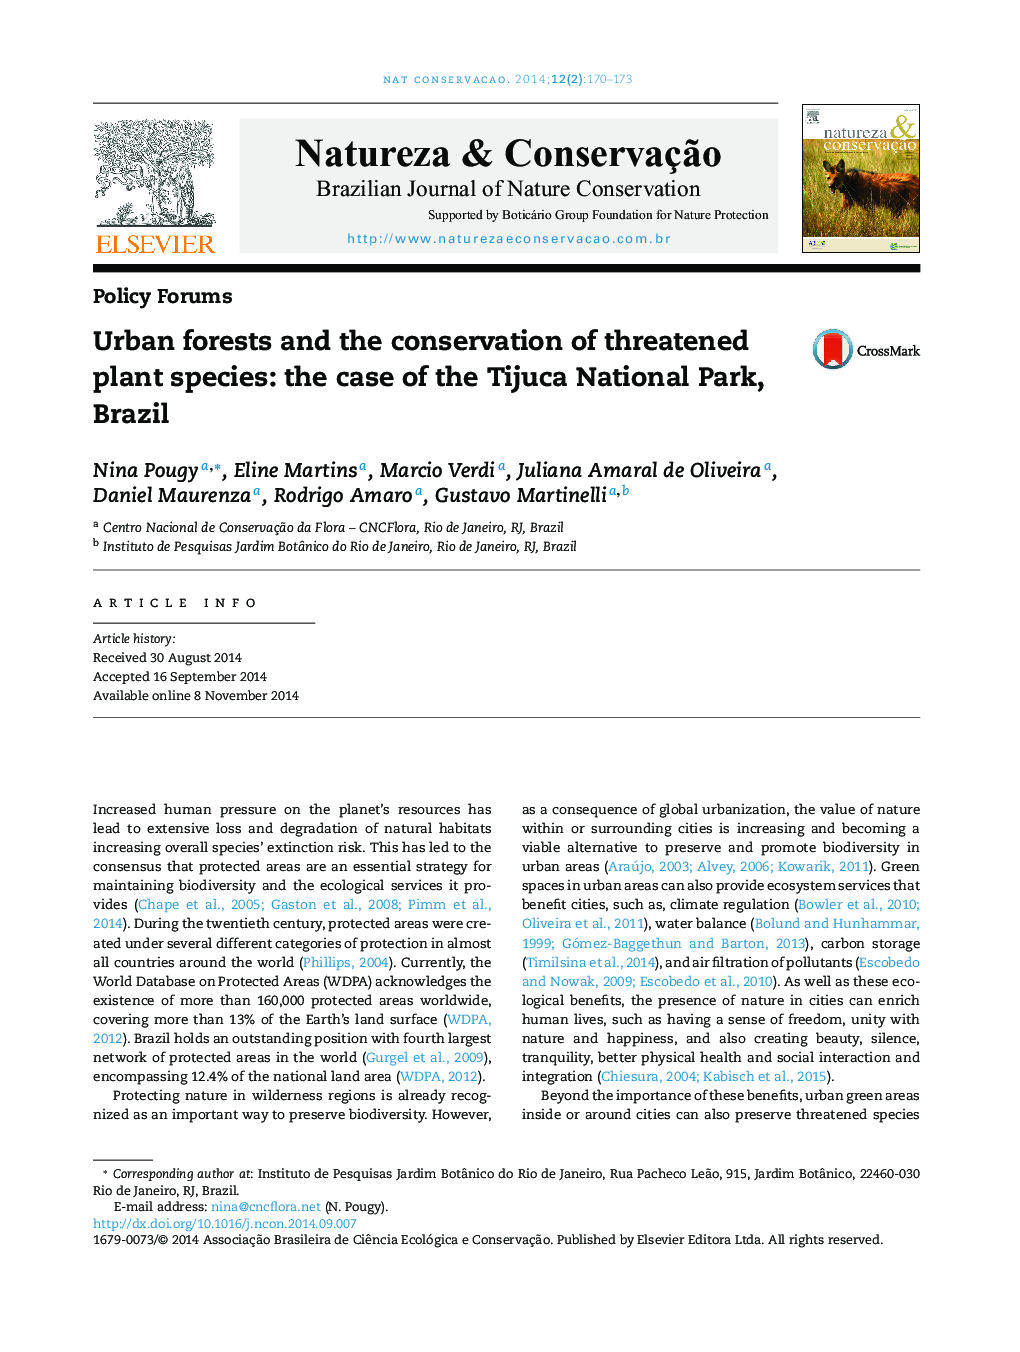 Urban forests and the conservation of threatened plant species: the case of the Tijuca National Park, Brazil